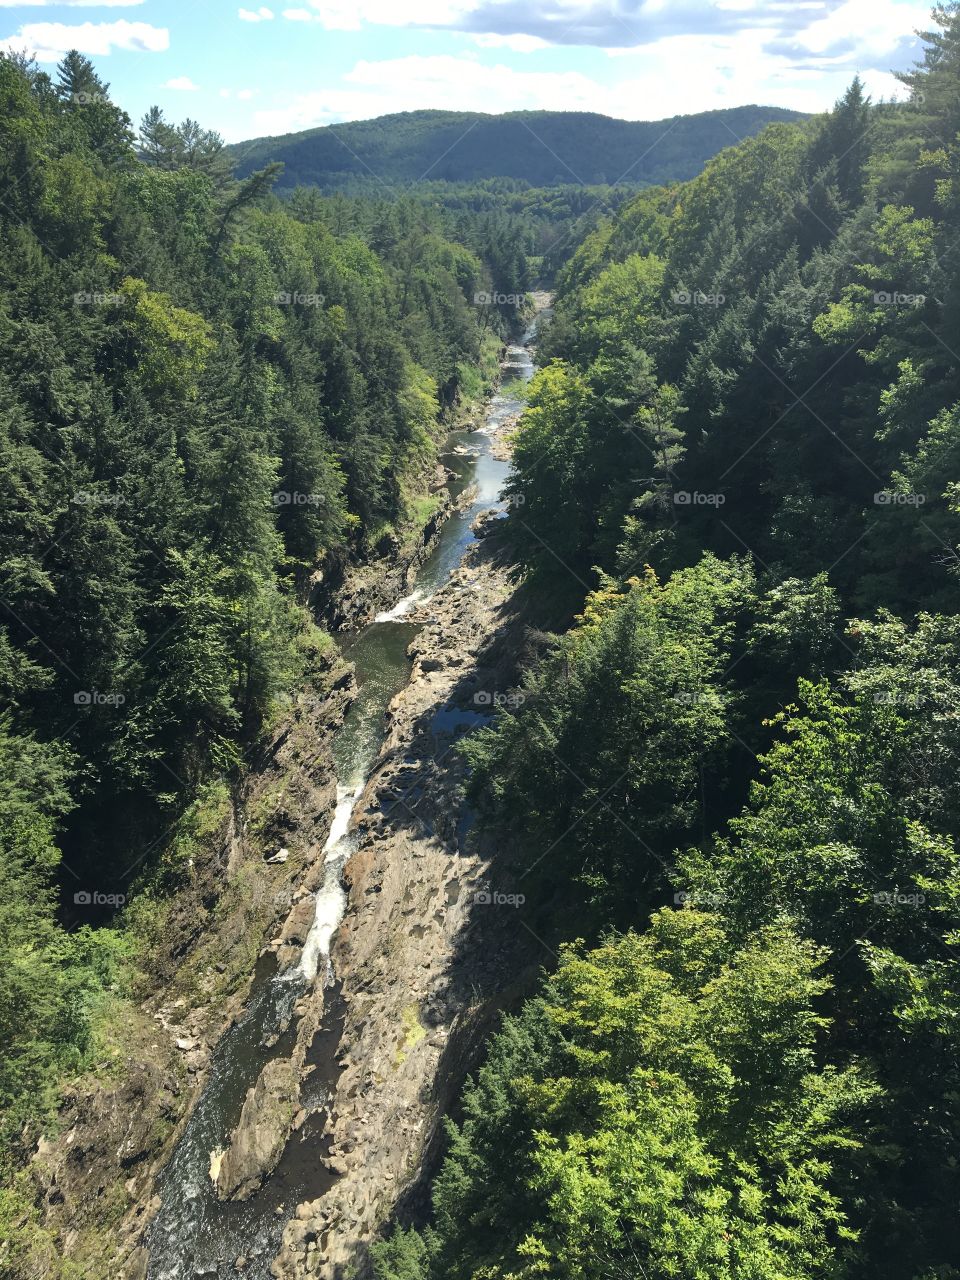 River in a canyon 